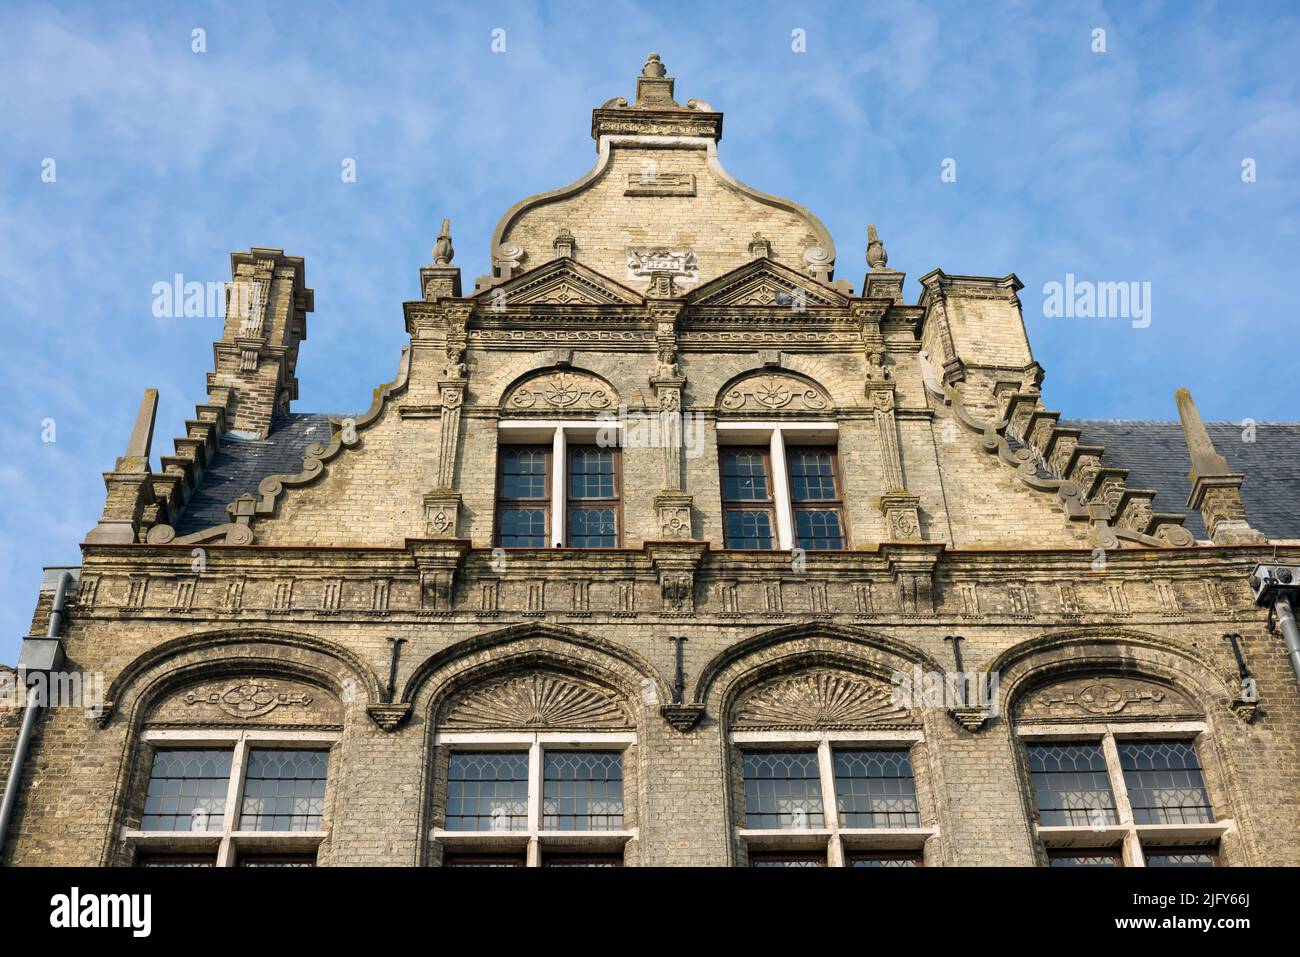 Typical step-gabled facades of medieval houses in Flanders, Belgium. These are on the market square of the 16th century market square in Veurne. Stock Photo